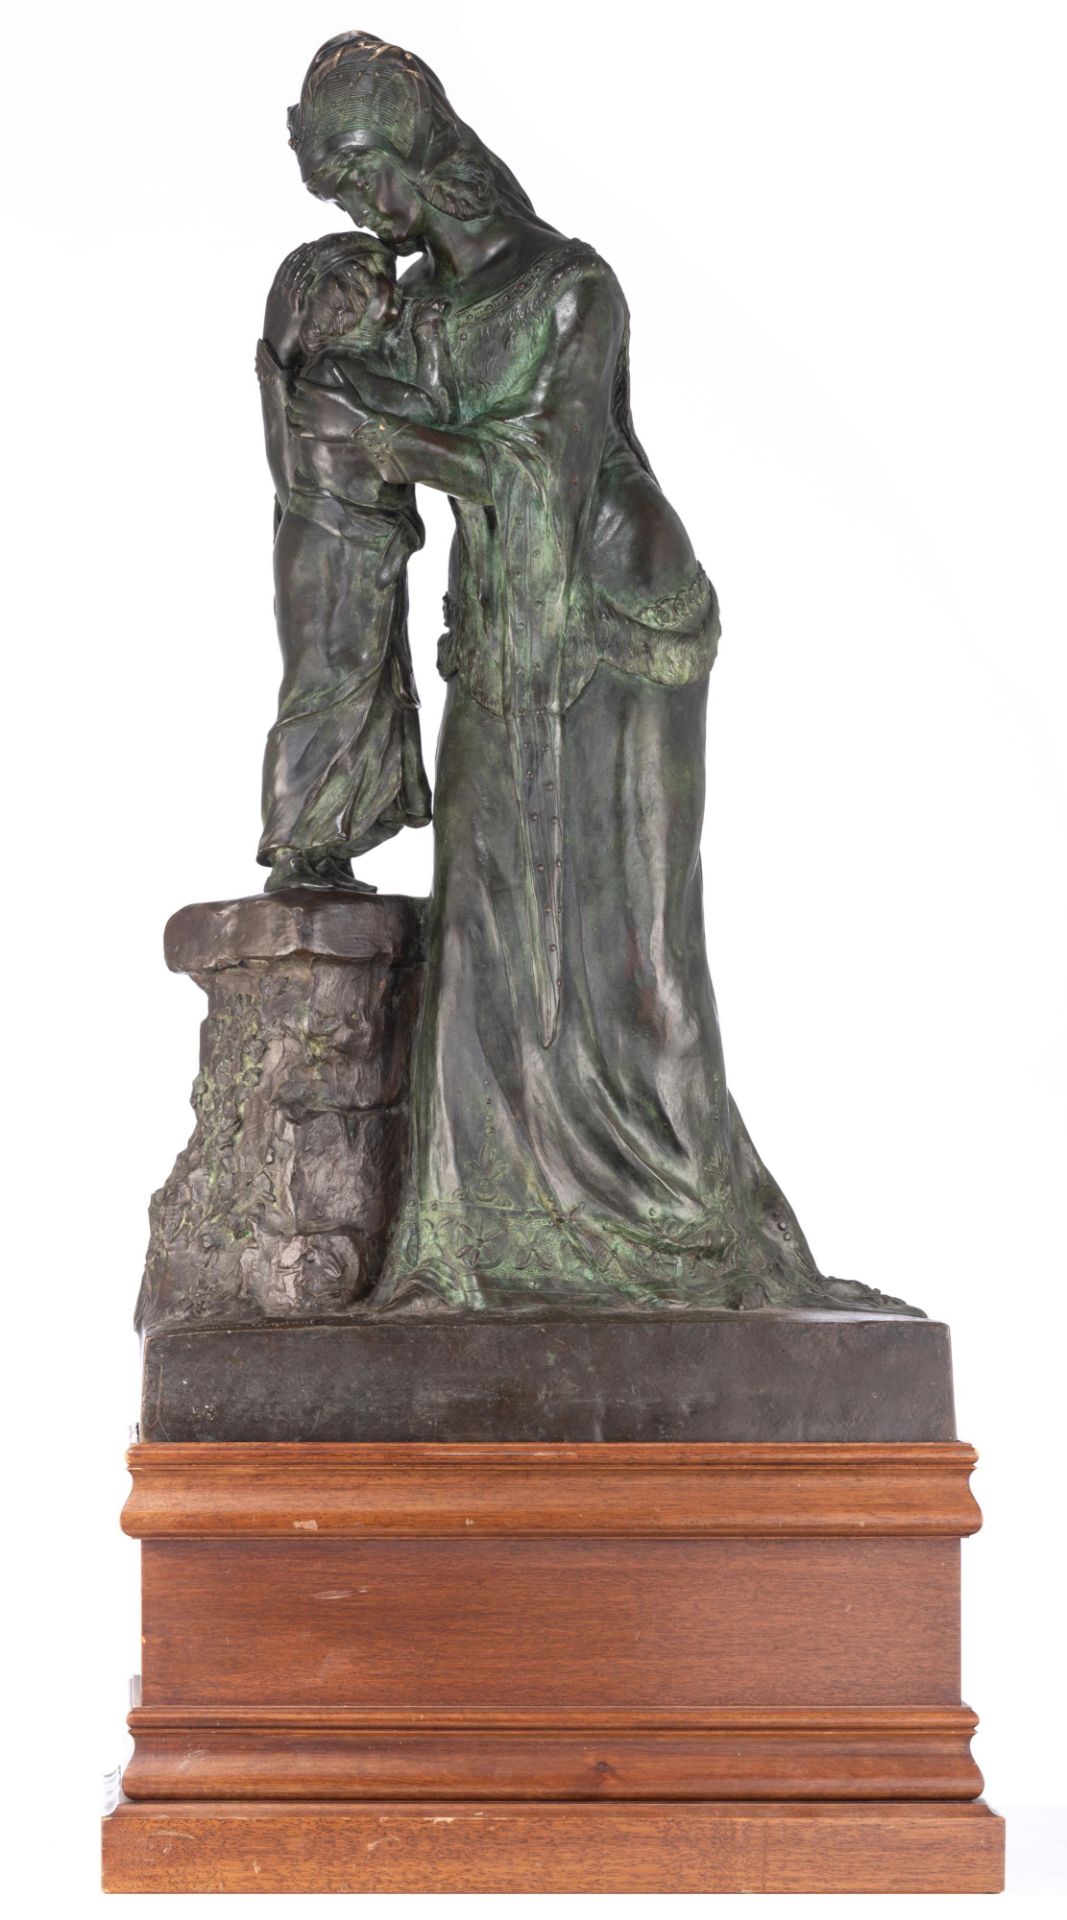 Constant M., motherly love, green patinated bronze on a walnut base, H 81,5 - 106 cm (without - with